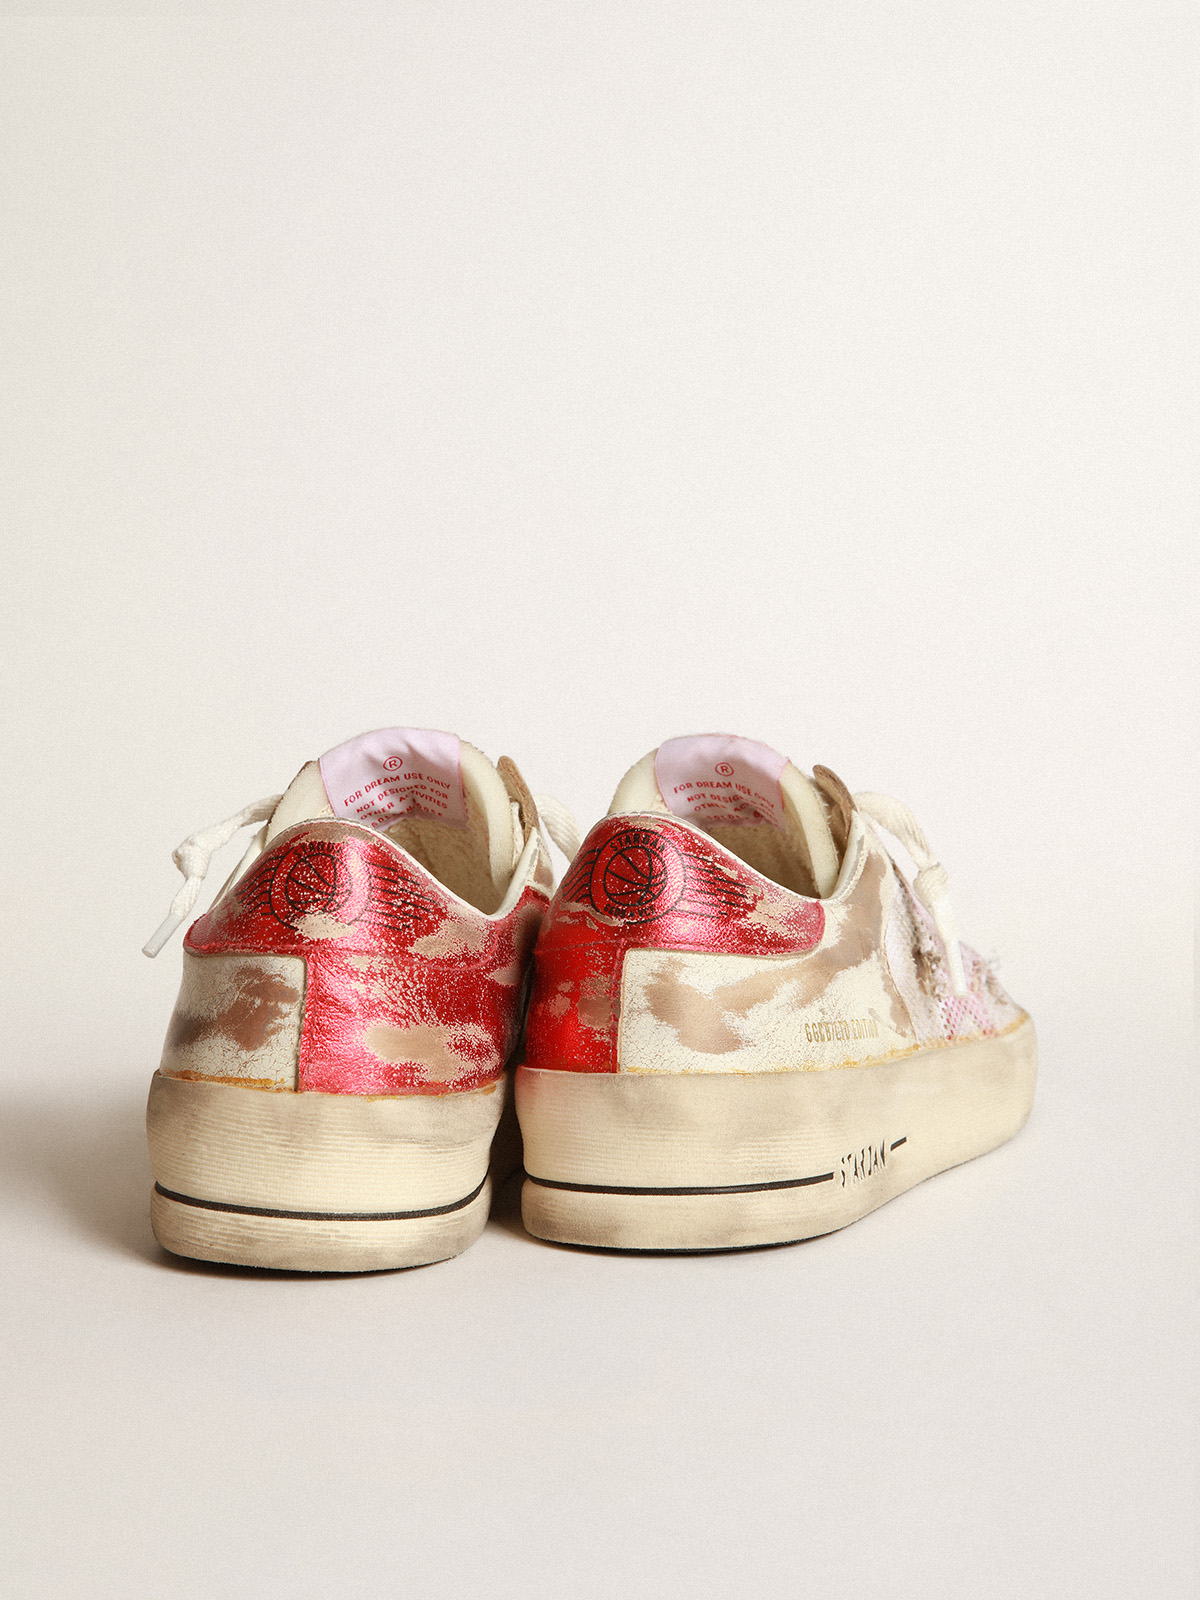 Stardan LAB sneakers in white leather and mesh with red laminated leather  star | Golden Goose